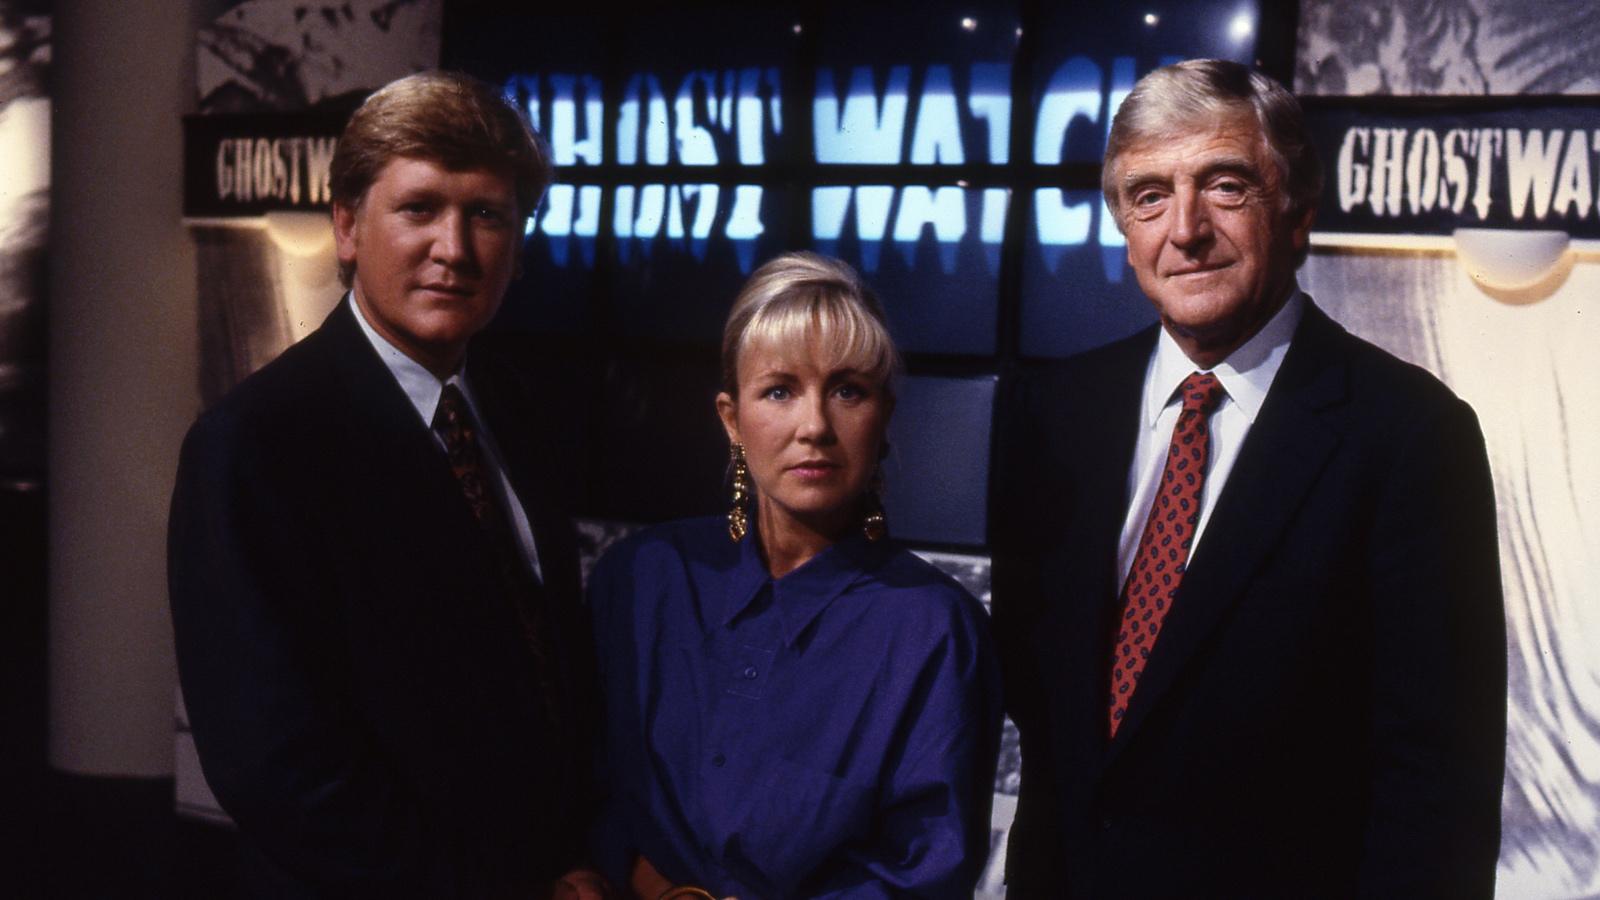 Mike Smith, Sarah Greene, Michael Parkinson for Ghostwatch horror show